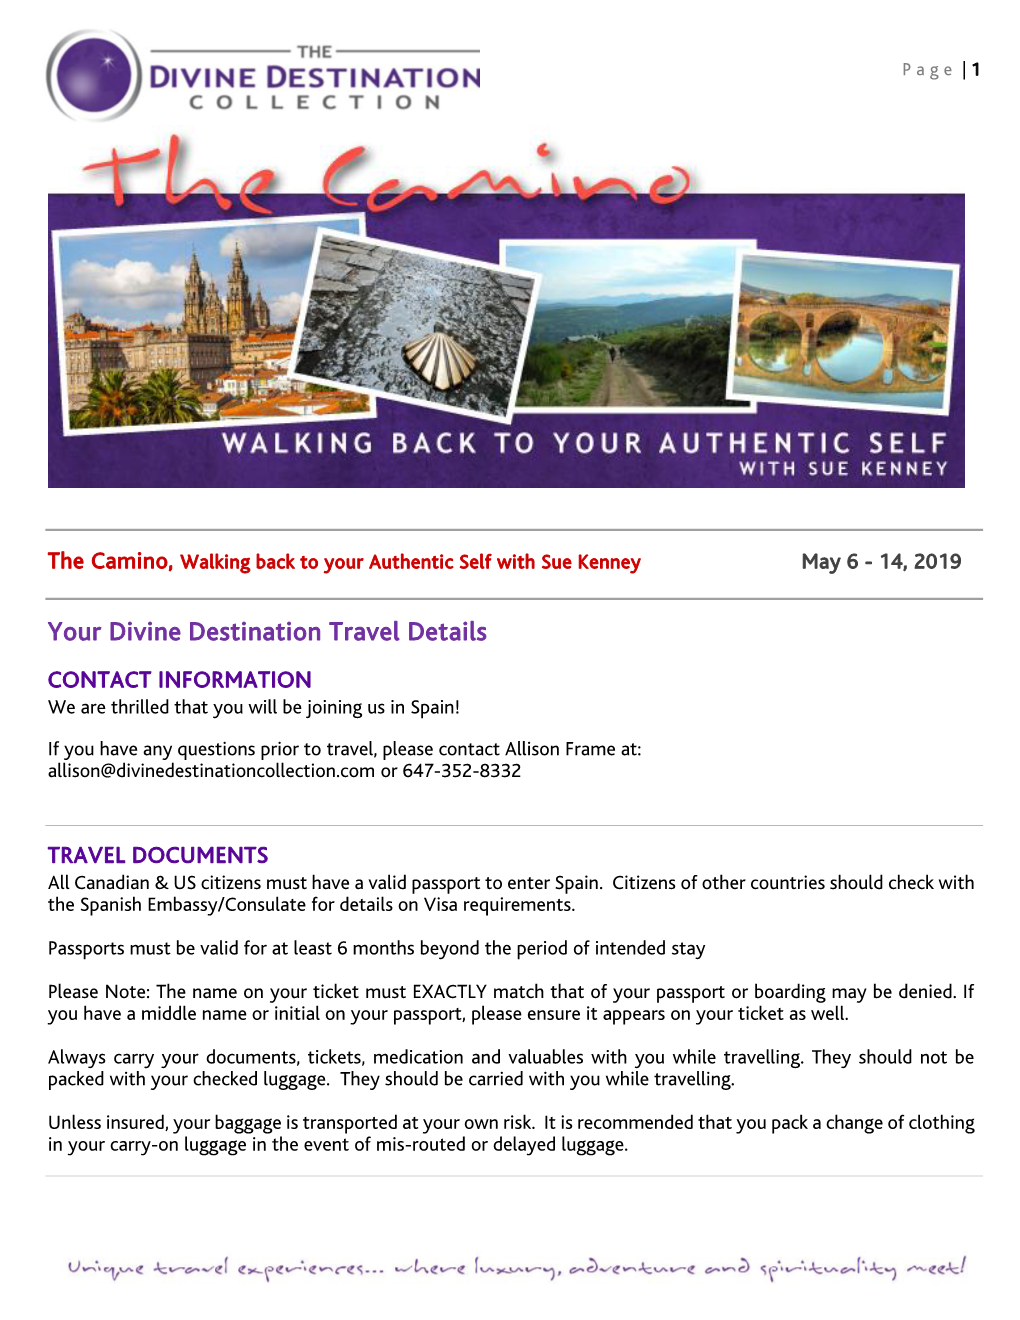 Your Divine Destination Travel Details CONTACT INFORMATION We Are Thrilled That You Will Be Joining Us in Spain!